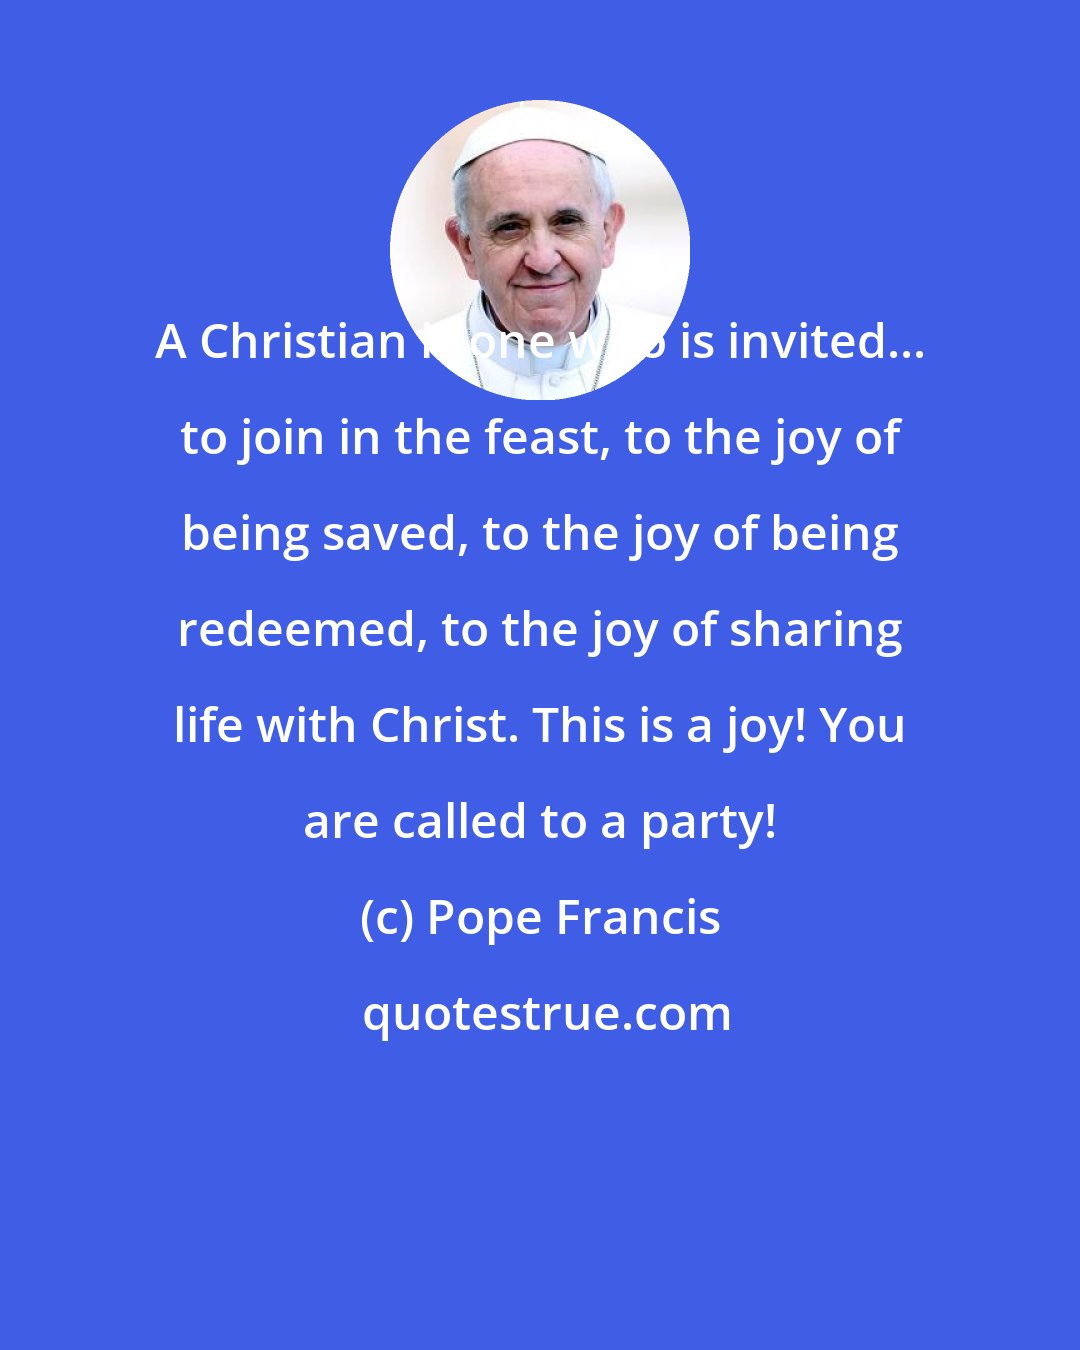 Pope Francis: A Christian is one who is invited... to join in the feast, to the joy of being saved, to the joy of being redeemed, to the joy of sharing life with Christ. This is a joy! You are called to a party!